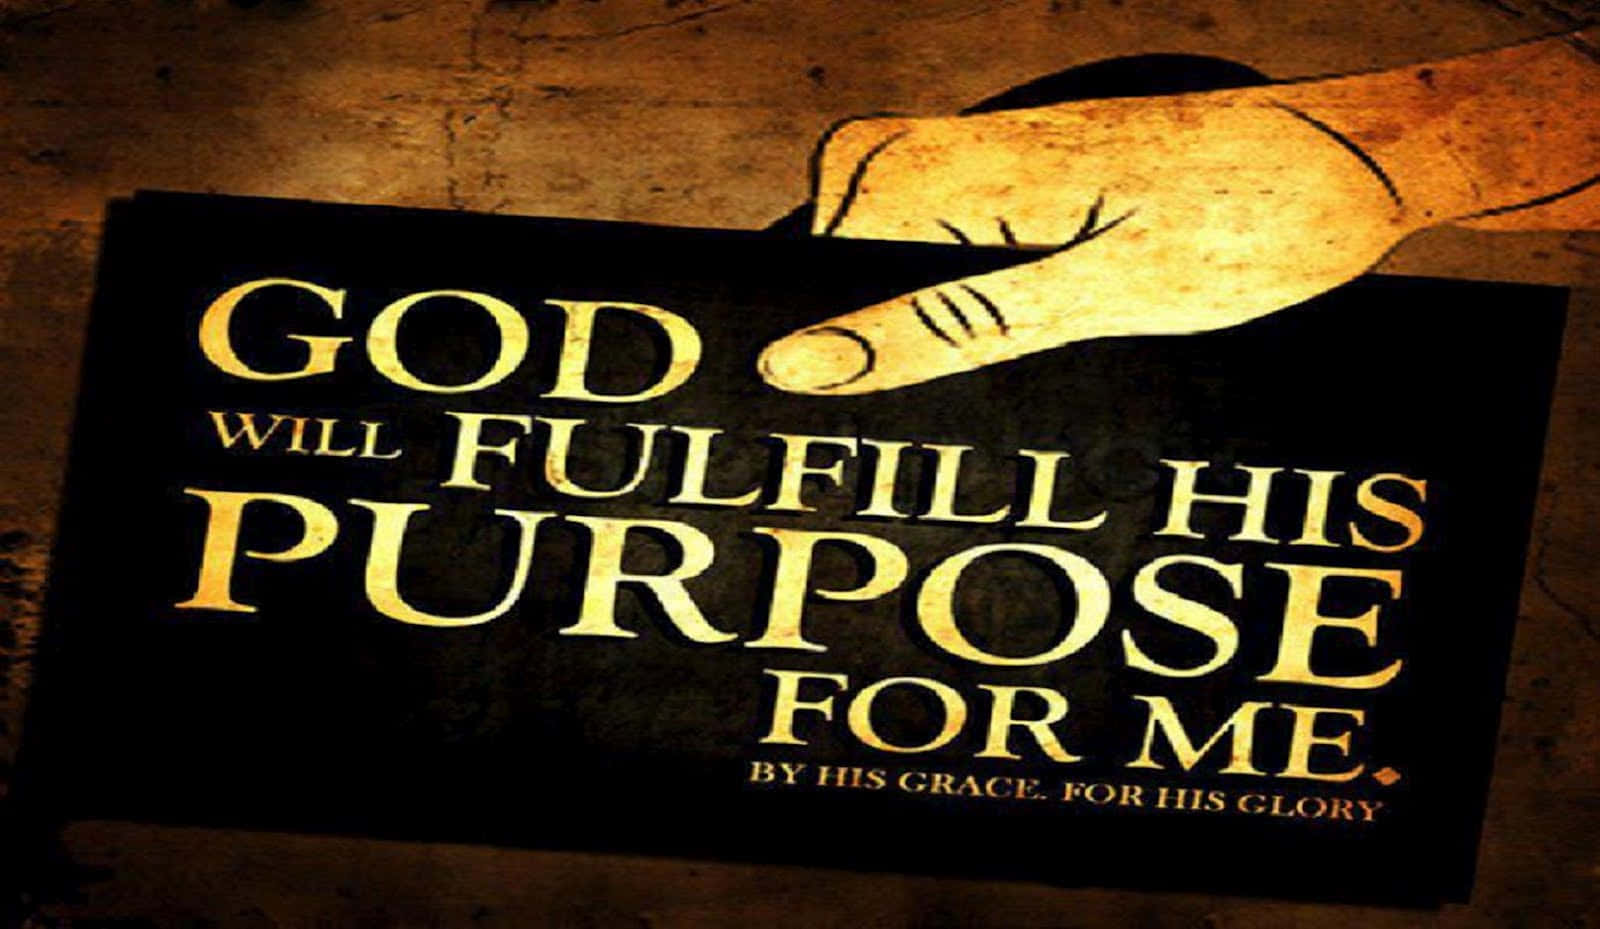 God Will Fulfill His Purpose For Me